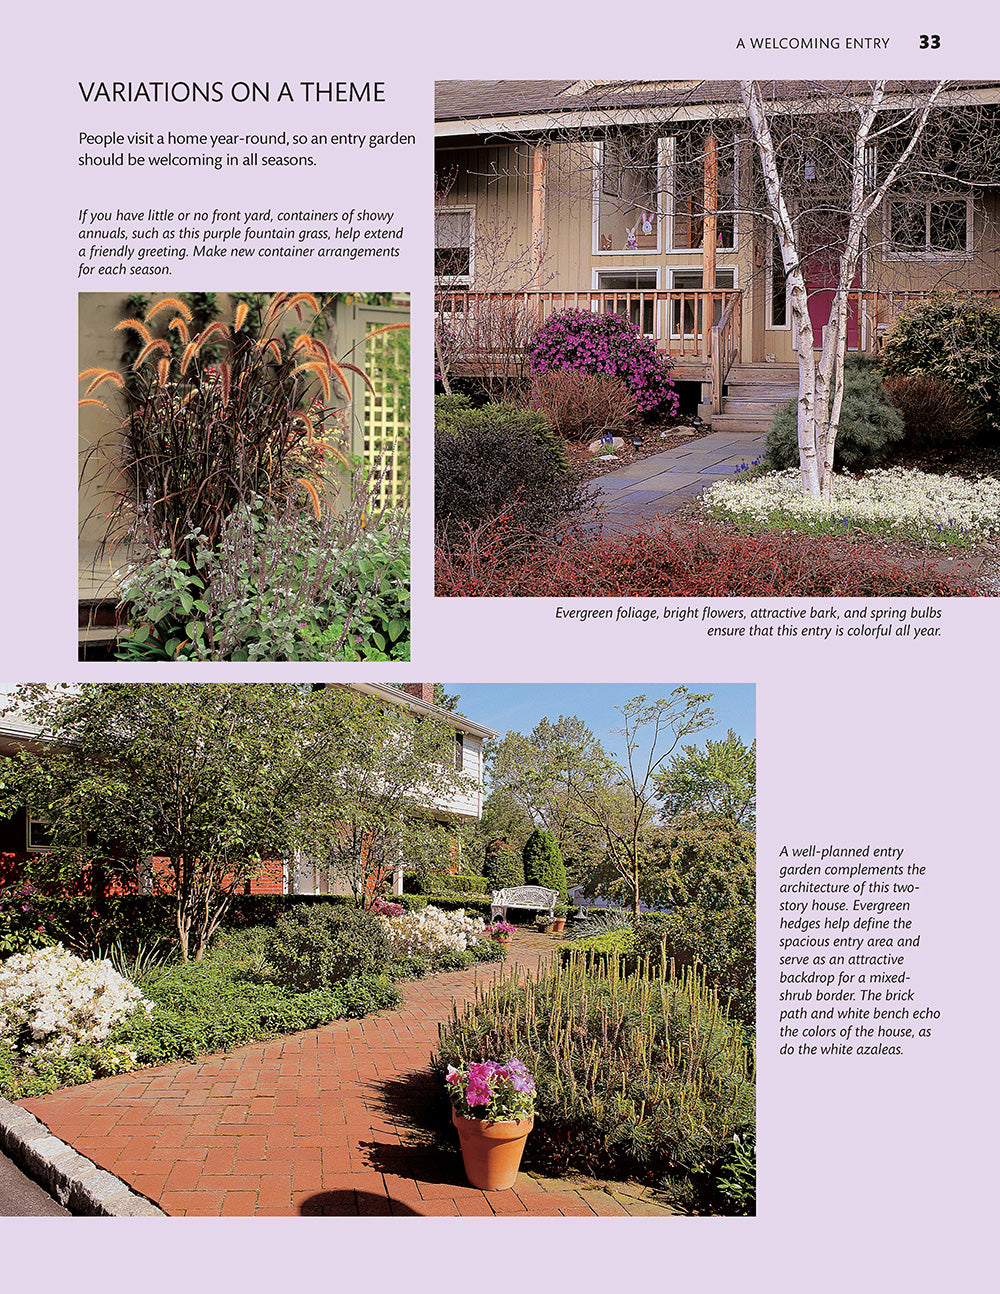 Mid-Atlantic Home Landscaping, 4th Edition